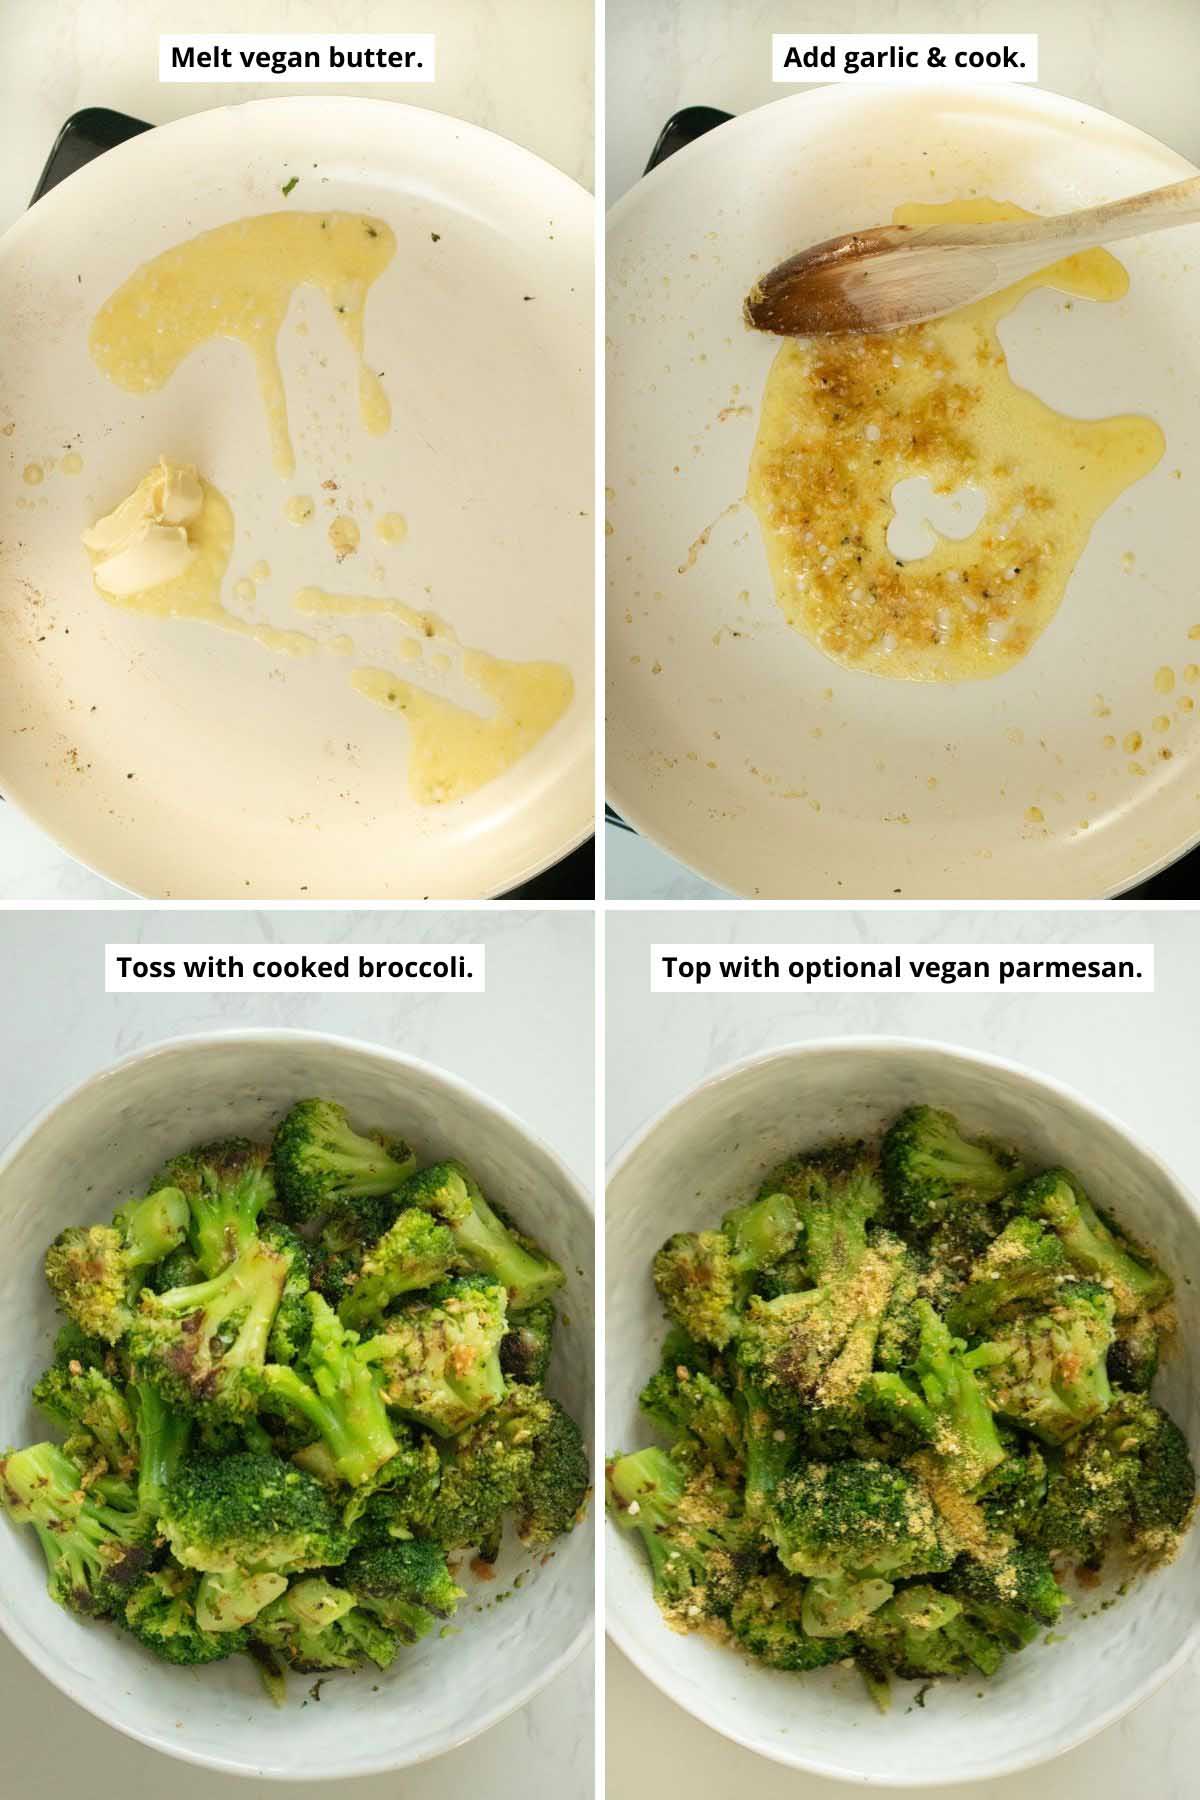 image collage showing melting the vegan butter and cooking the garlic, then the broccoli tossed with the garlic and then topped with vegan parmesan